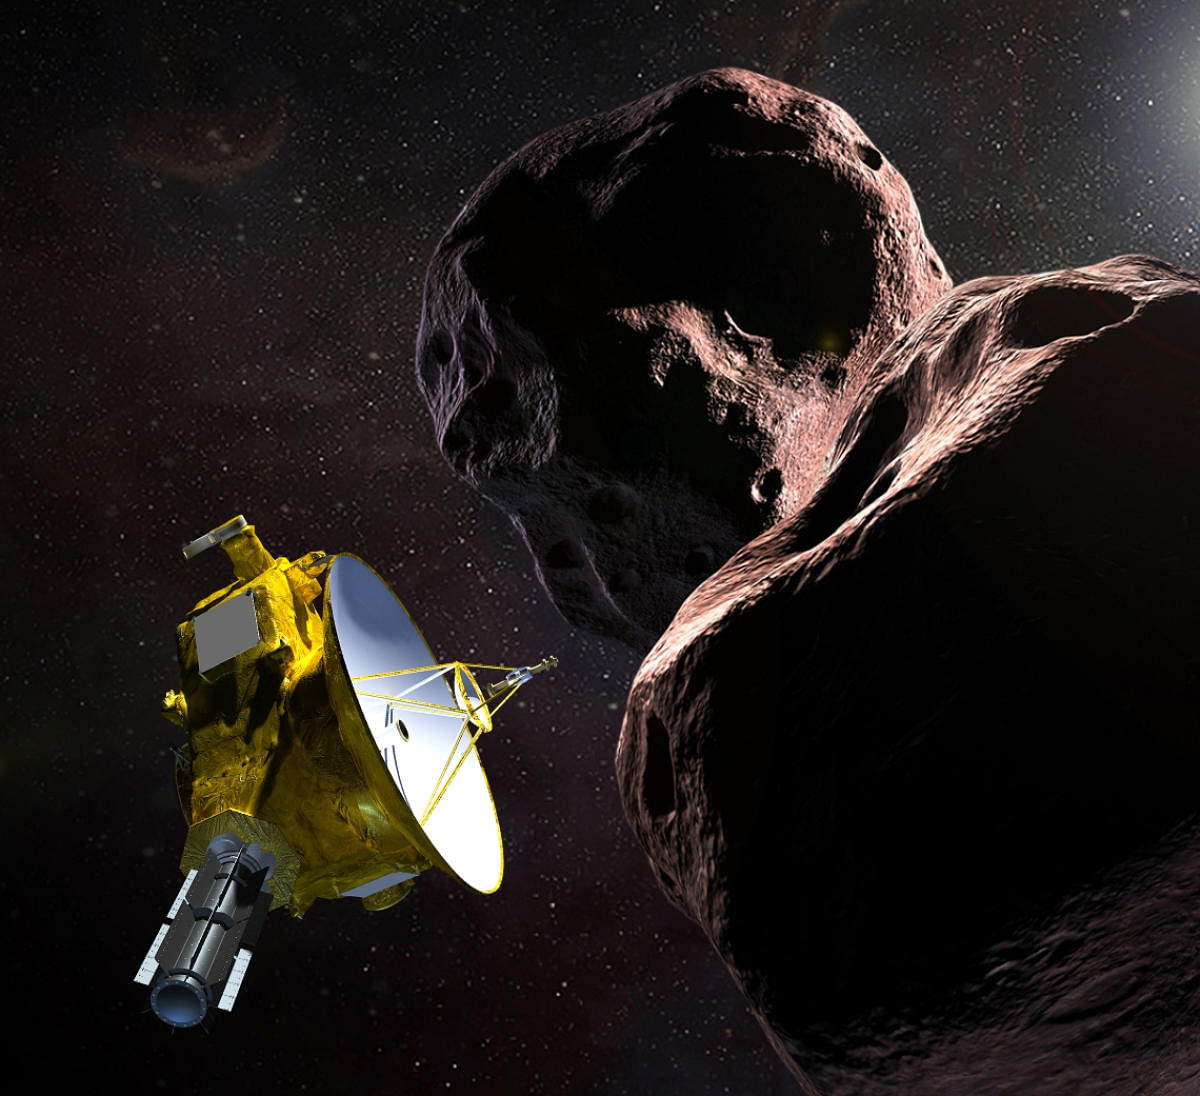 Just before its closest approach during the New Year's flyby, the spacecraft precisely pointed the cameras to snap the sharpest possible pics of the Kuiper Belt object officially named 2014 MU69. (AFP File Photo)